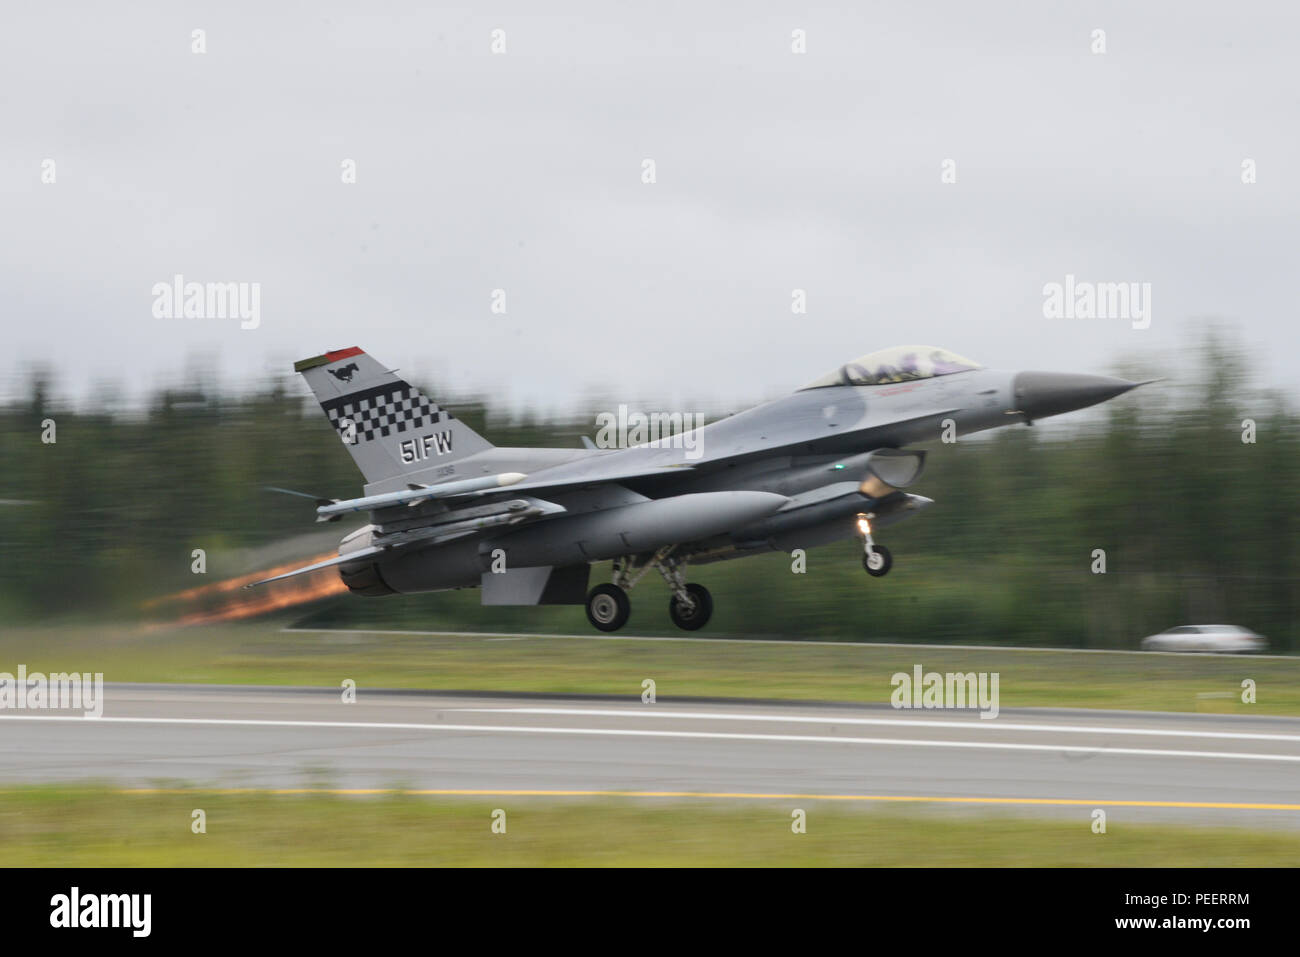 A U.S. Air Force F-16 Fighting Falcon assigned to the 36th Fighter Squadron, Osan Air Base, Republic of Korea, takes off from Eielson Air Force Base, Alaska, Aug. 10, 2015, during Red Flag-Alaska (RF-A) 15-3. RF-A is a series of Pacific Air Forces commander-directed field training exercises for U.S. and partner nation forces, providing combined offensive counter-air, interdiction, close air support and large force employment training in a simulated combat environment. (U.S. Air Force photo by Senior Airman Ashley Nicole Taylor/Released) Stock Photo